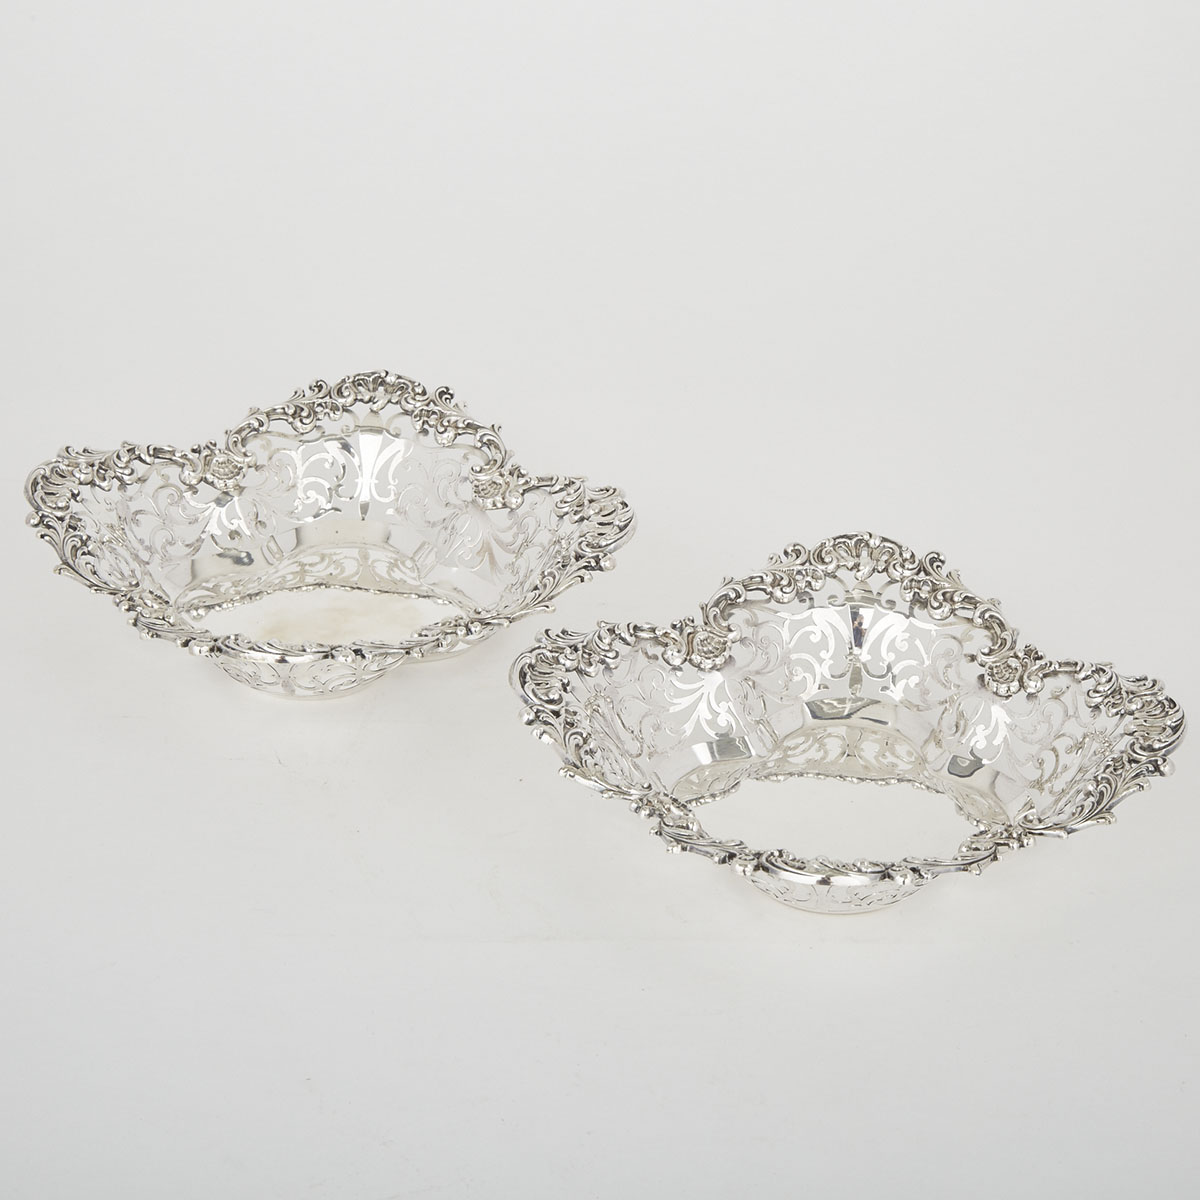 Pair of American Silver Shaped Square Pierced Baskets, Howard & Co., New York, N.Y., 1895